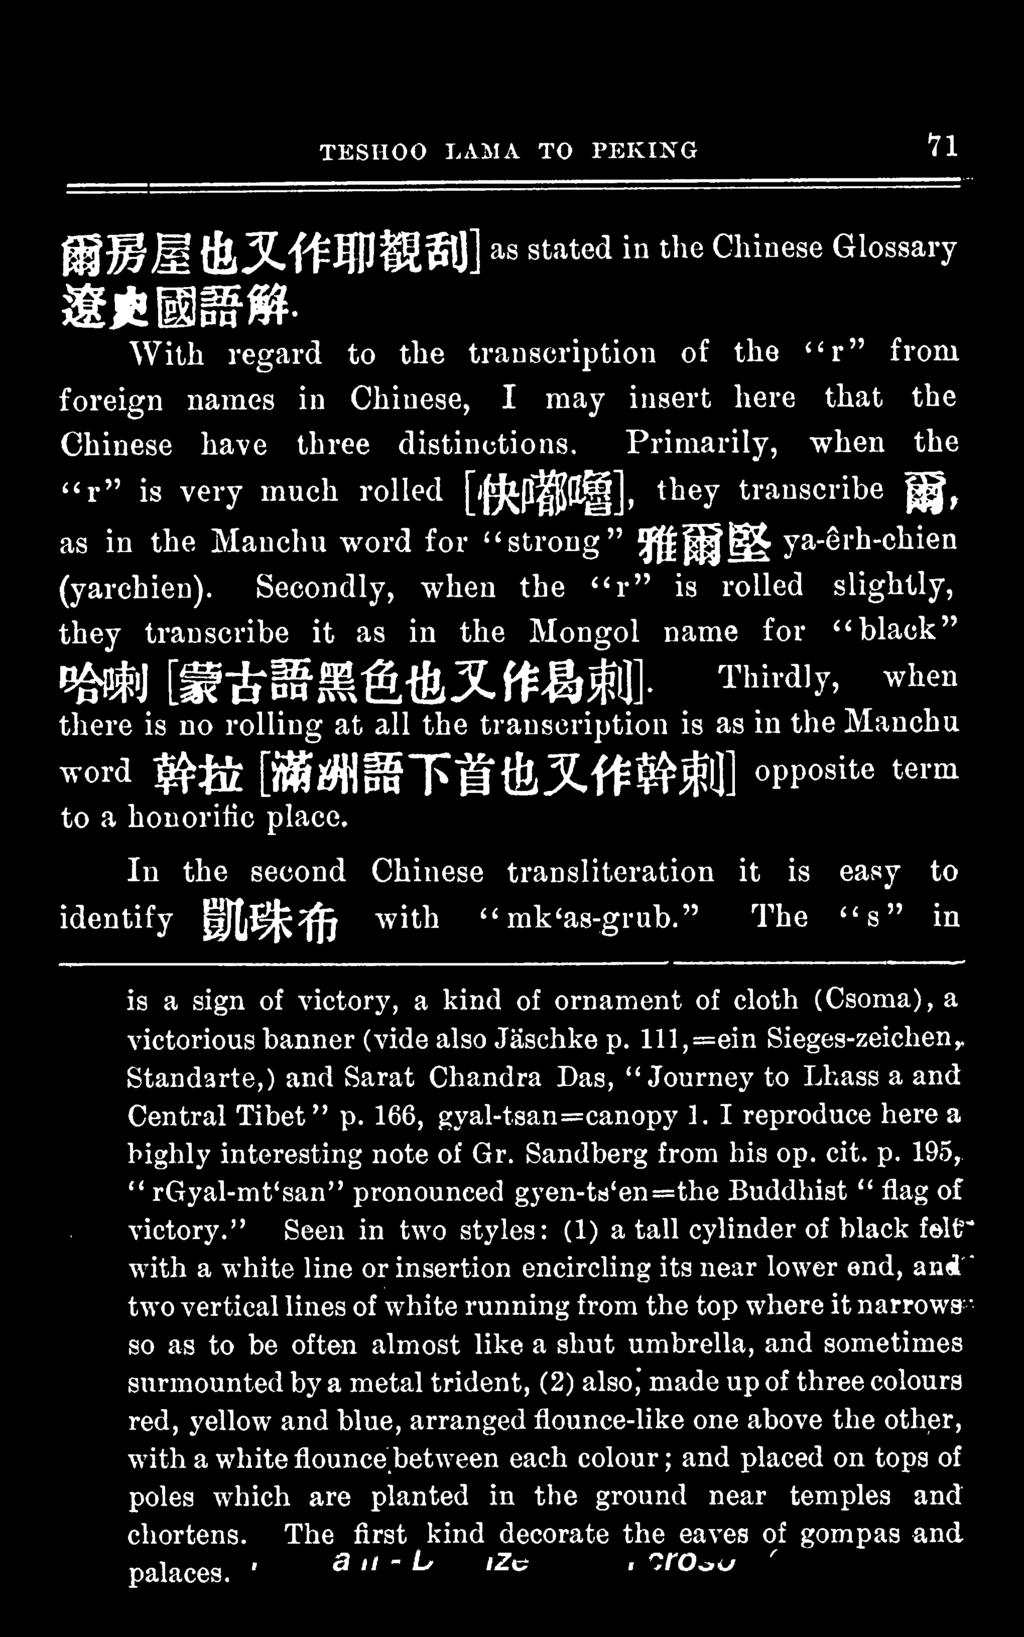 Secondly, when the "r" is roiled slightly, they transcribe it as in the Mongol name for "black" there is no rolling at all the transcription is as in the Manchu word $& [MmRTM&XftftM pp site to a